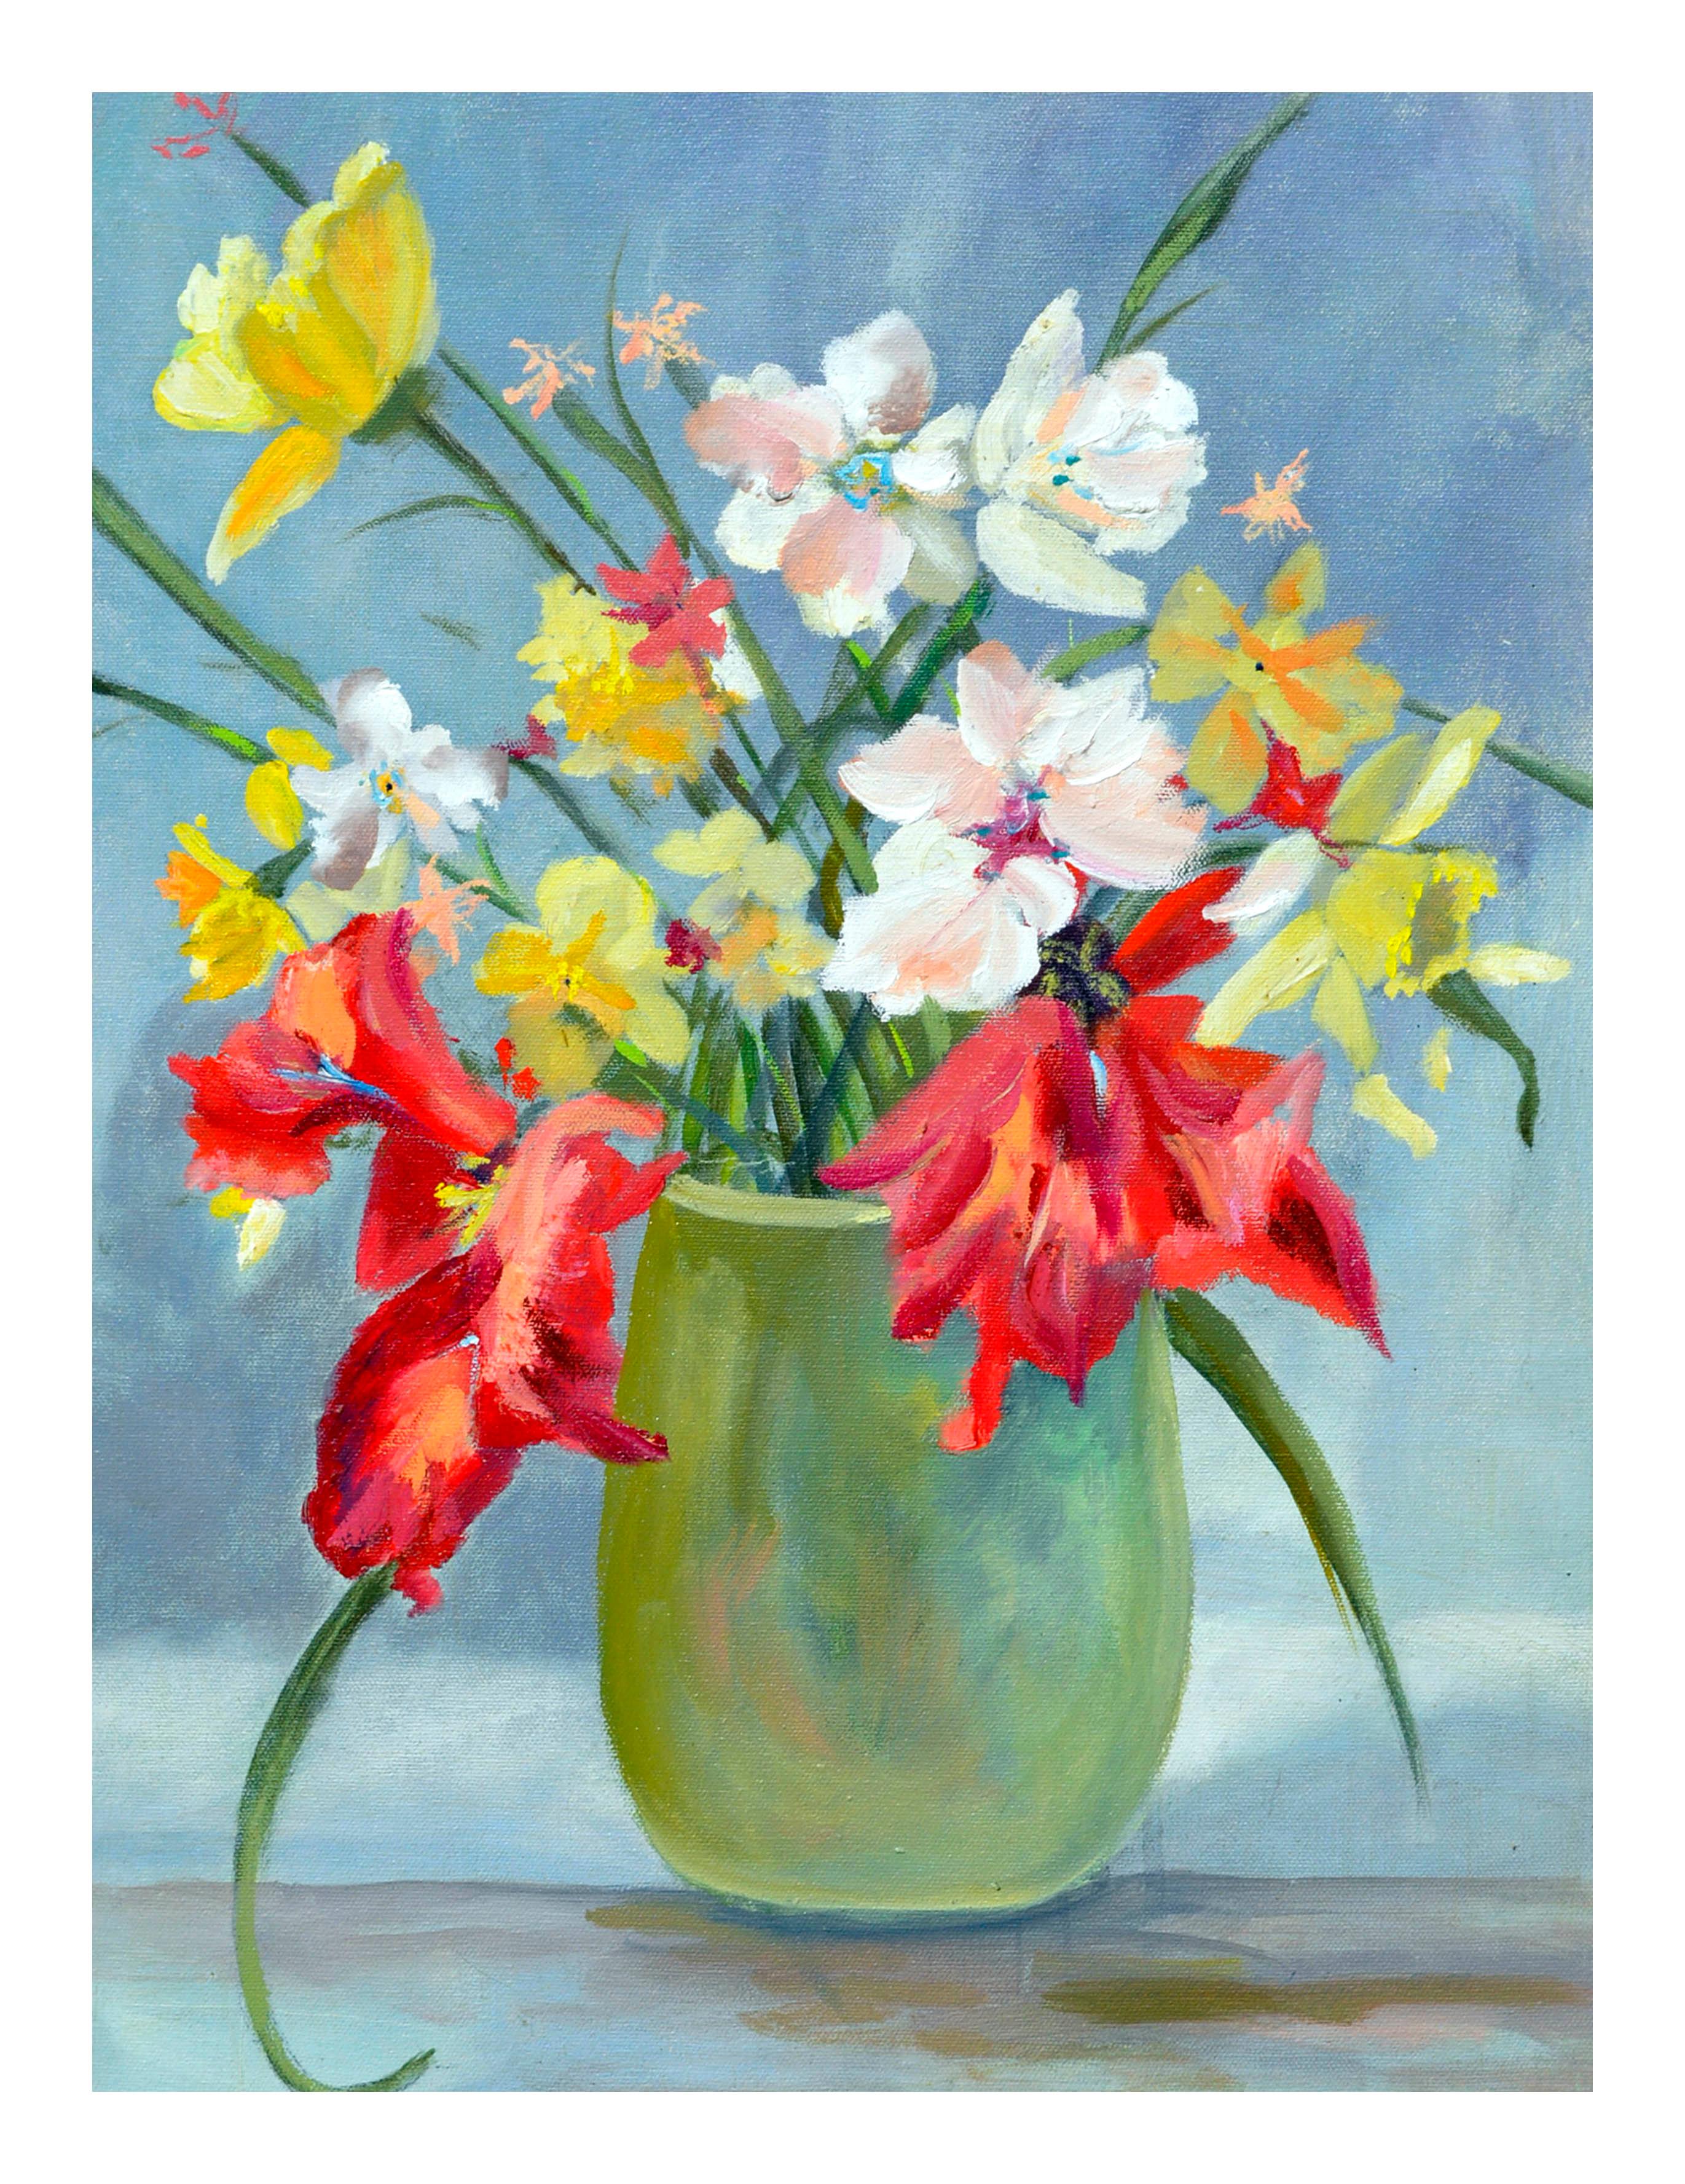 Vibrant Spring Bulb Still Life - Painting by Unknown